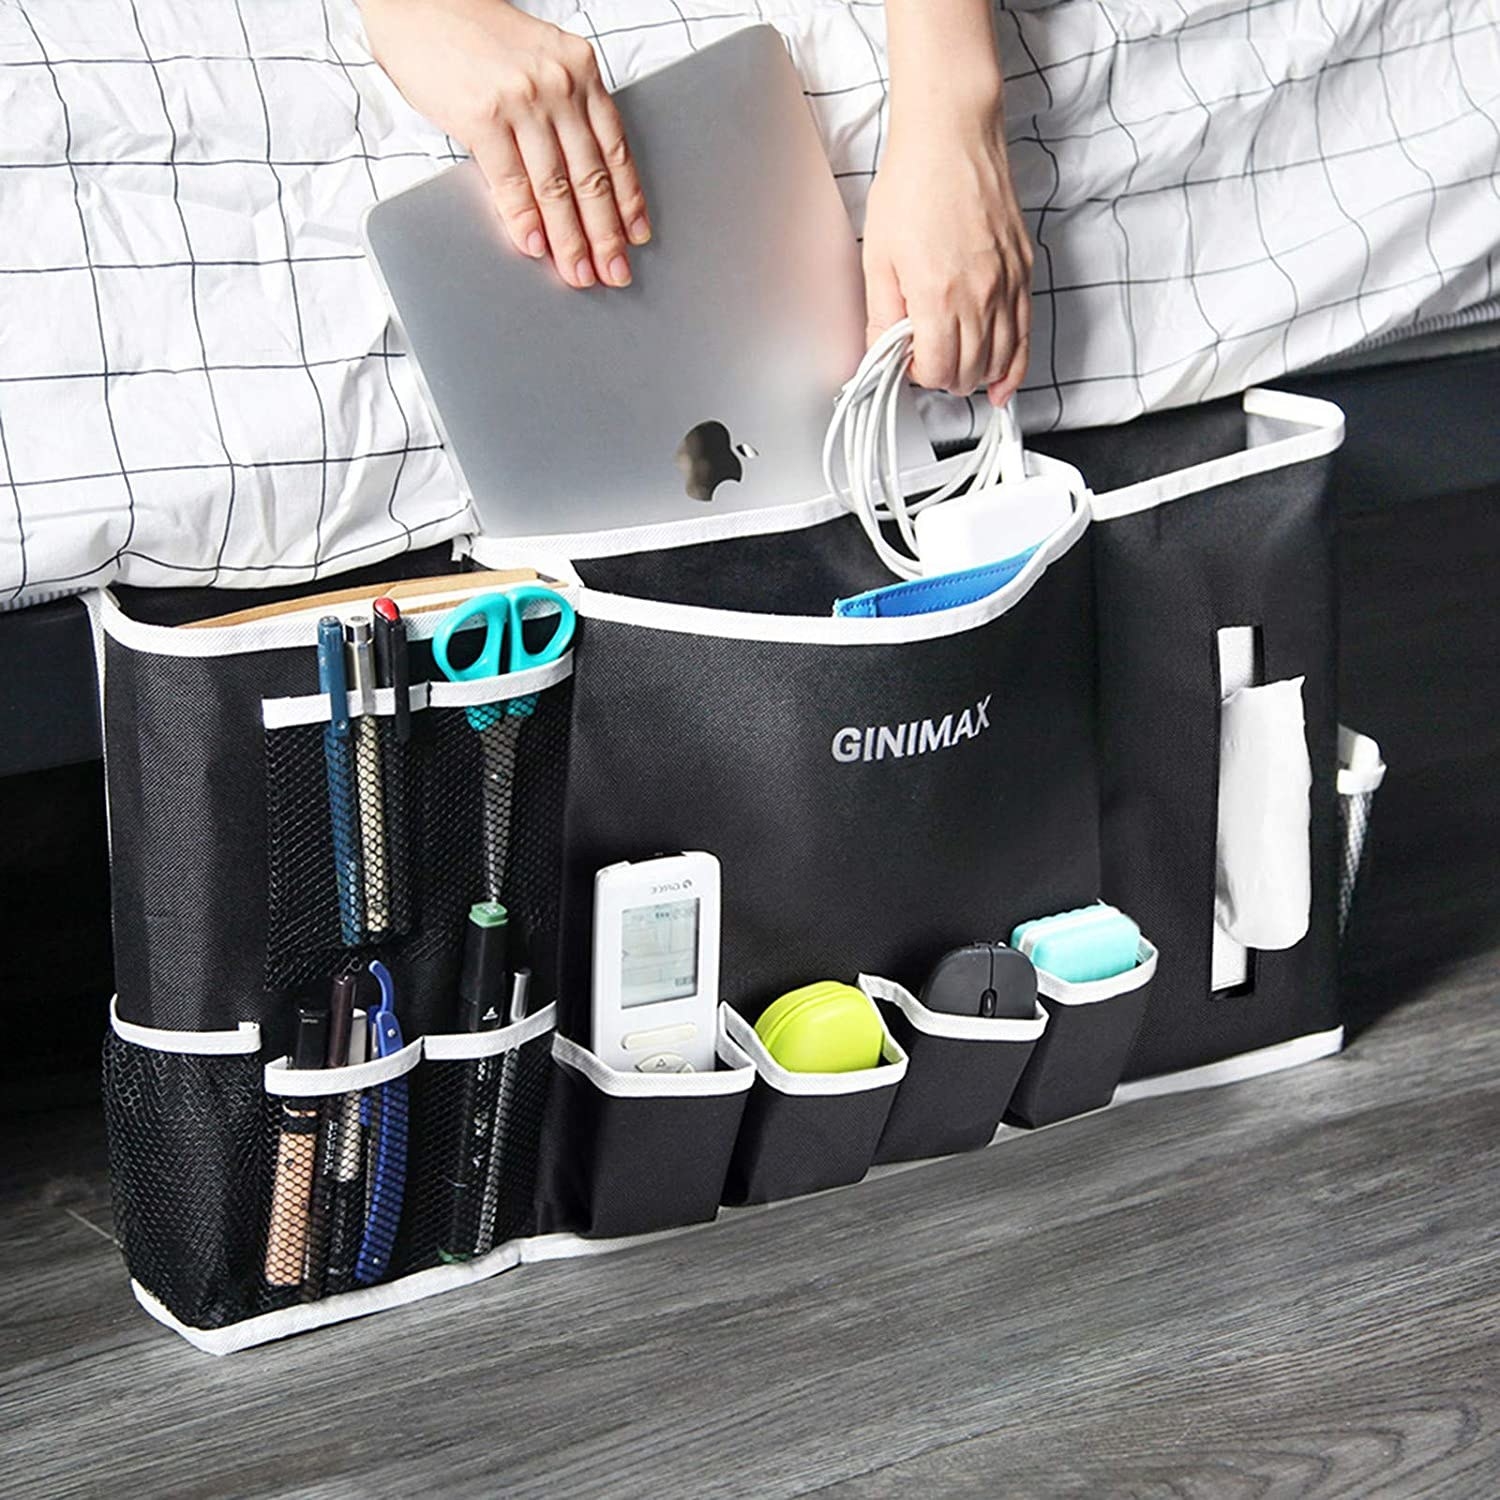 A person putting their laptop into the already-stuffed caddy